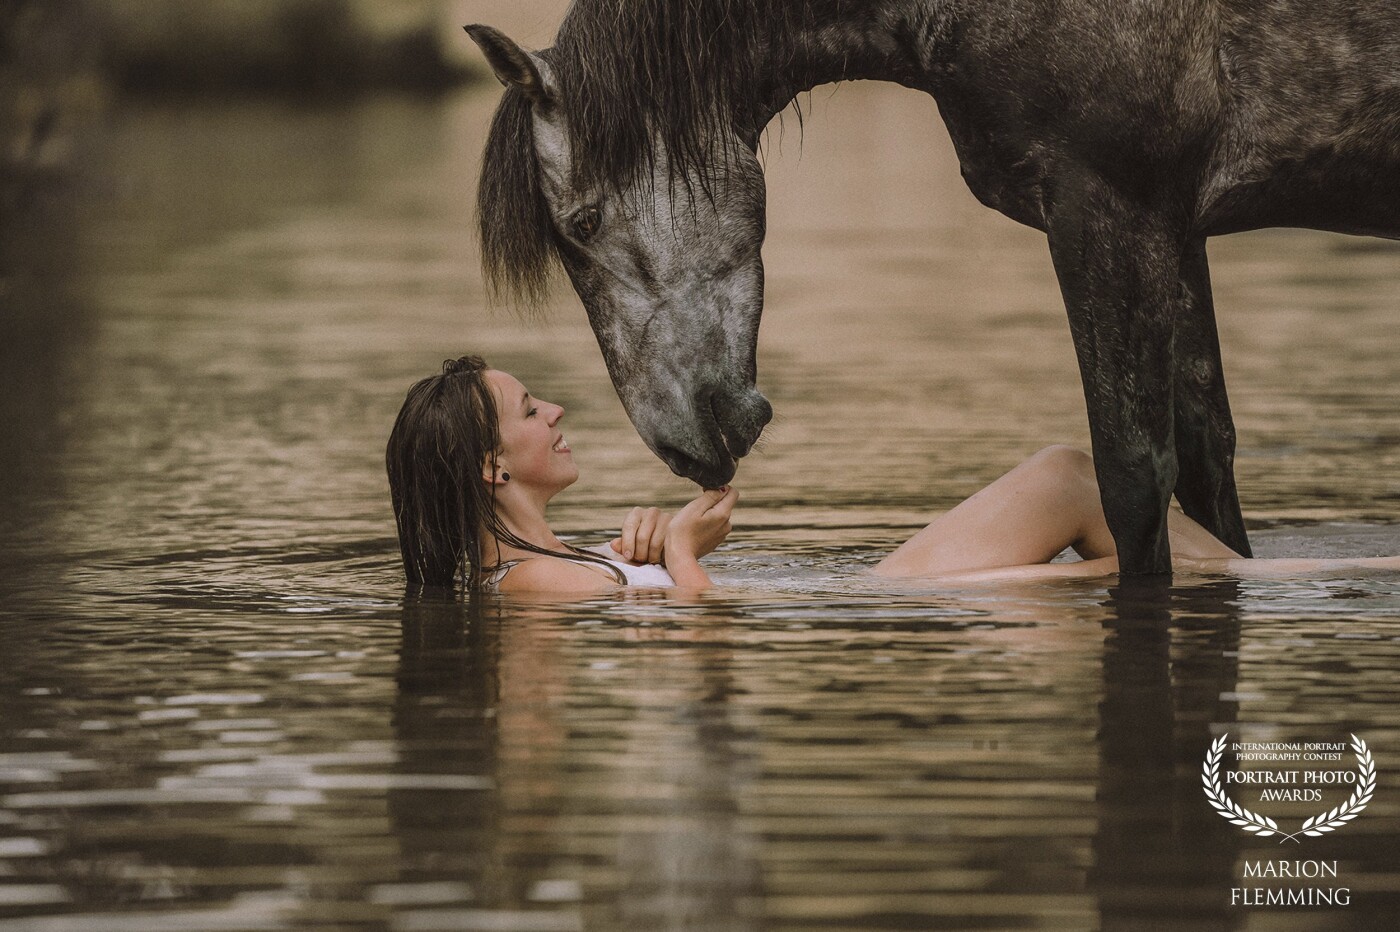 Janine and her wonderful spanish horse "Choclate".  Choclate is like a dog, he follow Janine everywhere and know a lot of tricks. Janine and Choclate are often goes swimming into this lake.  I took this photo with my Sony A9II and the 70-200 mm F2.8. during a warm summer evening.